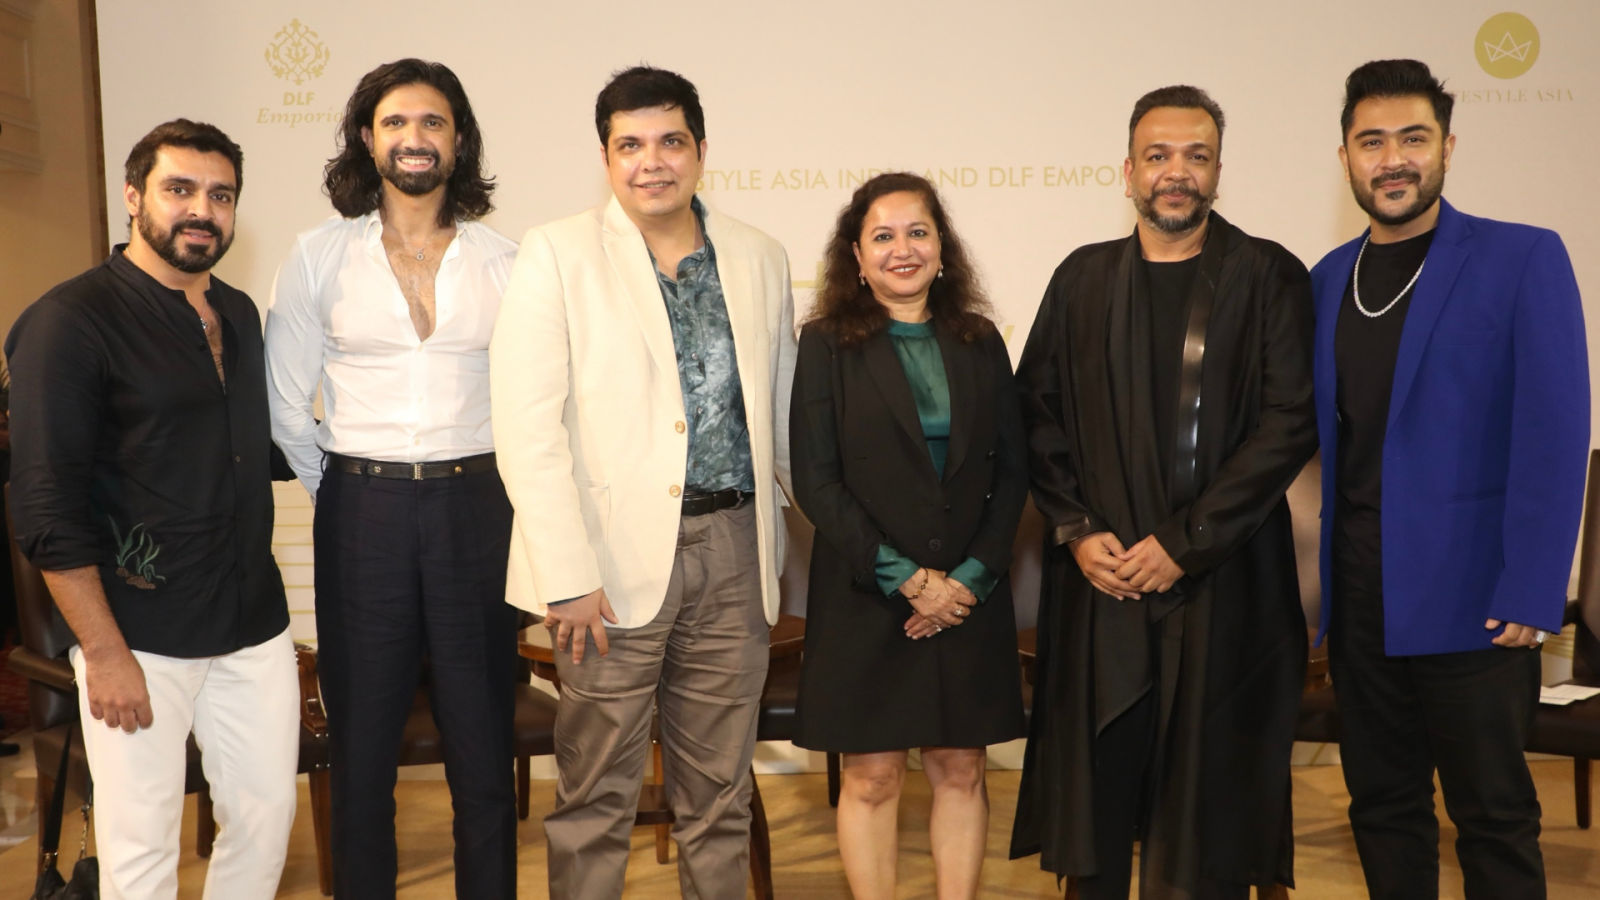 Insights on Luxury & Culture from 'Fashion Forward' held at DLF Emporio